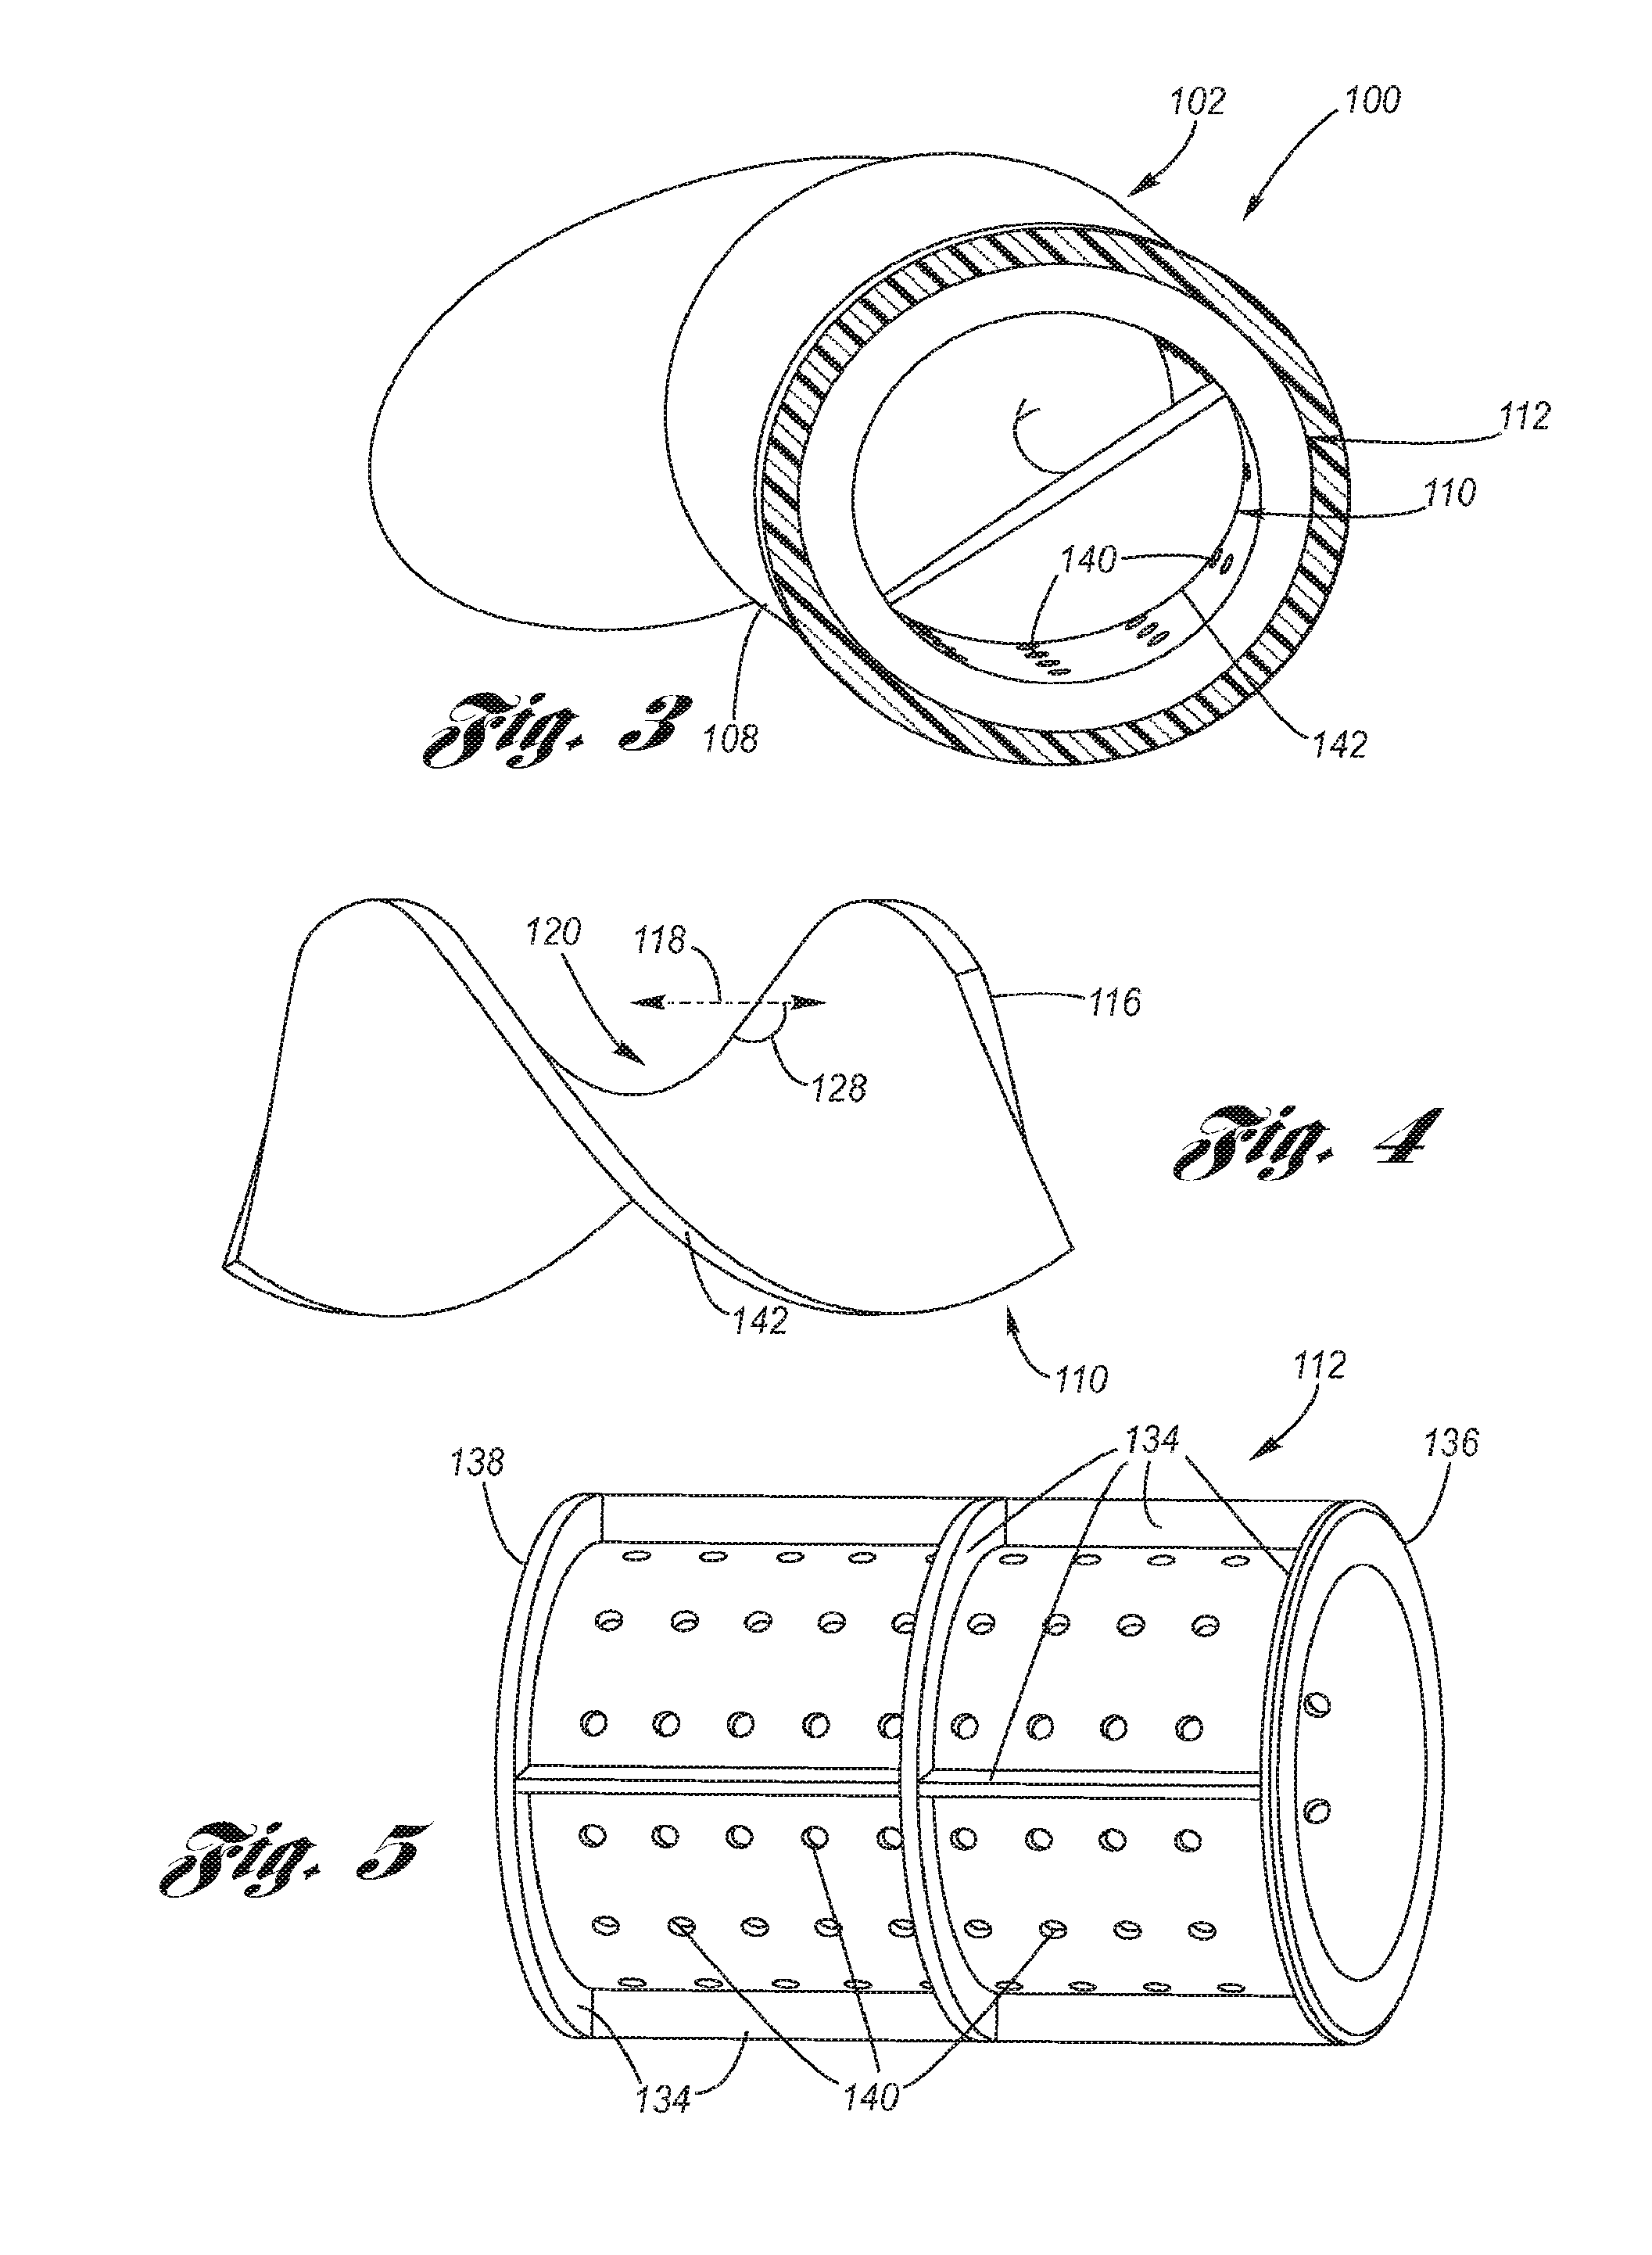 Induction system with air flow rotation and noise absorber for turbocharger applications